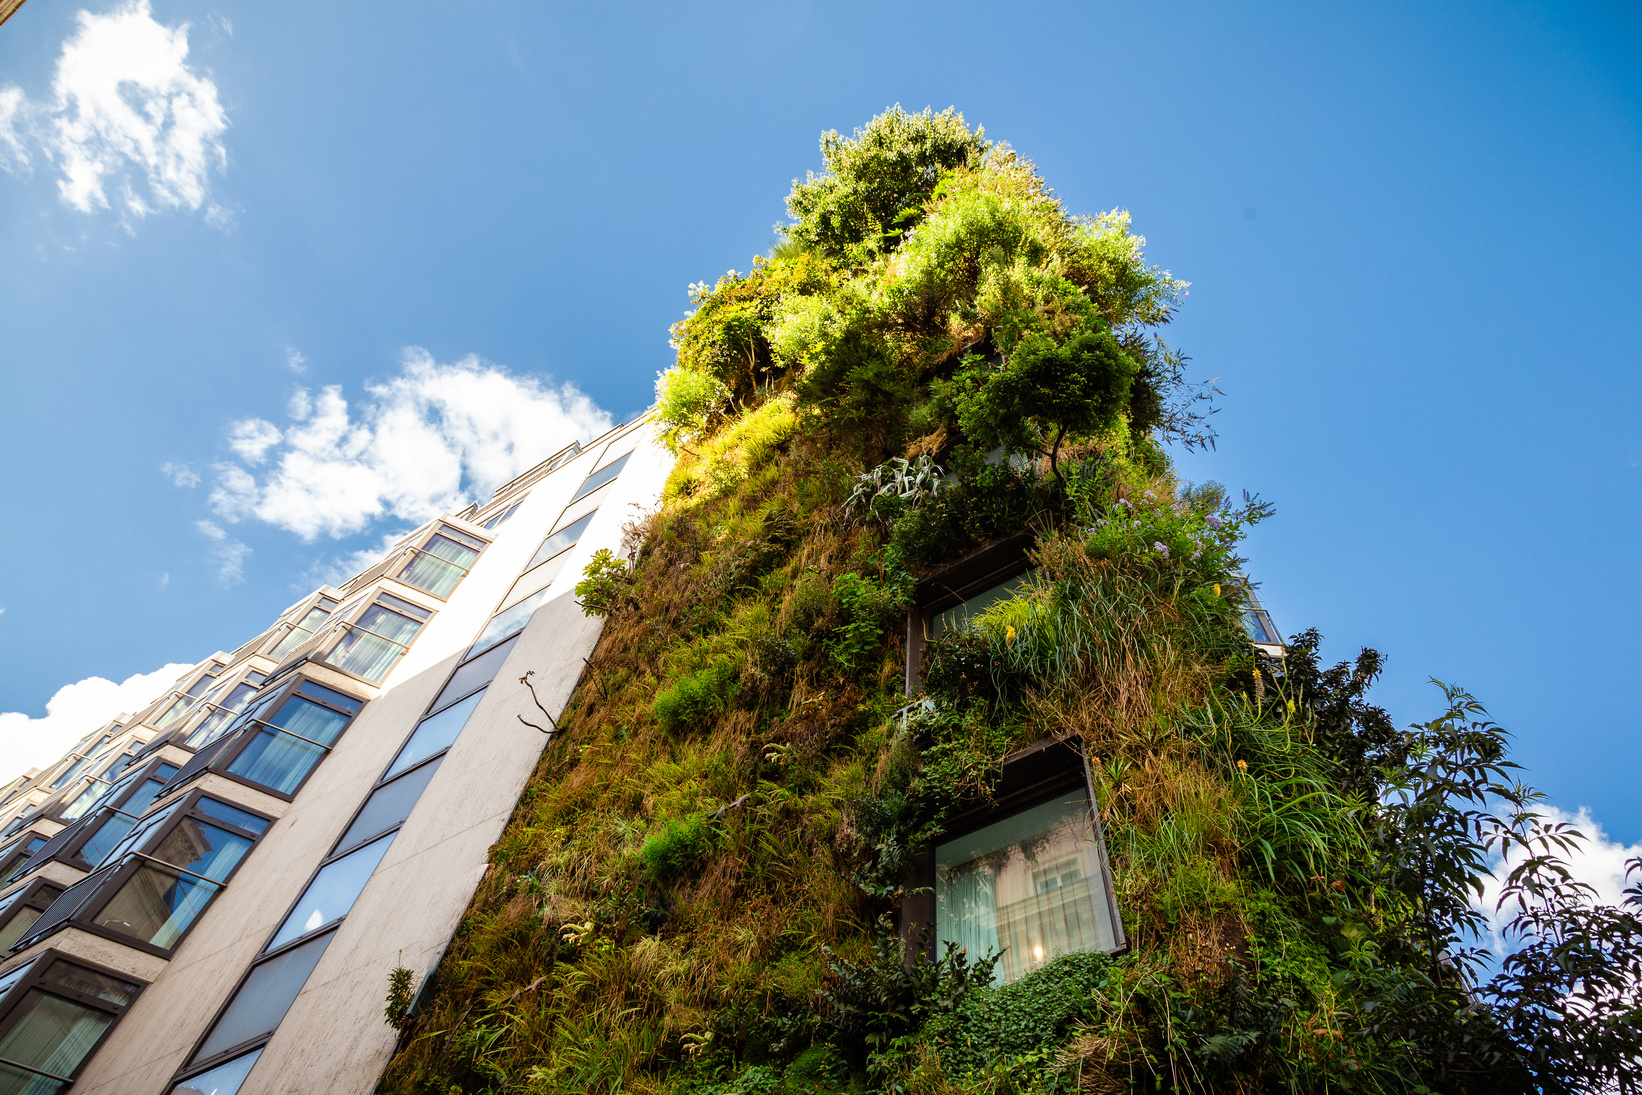 Sustainable green buildings in the city